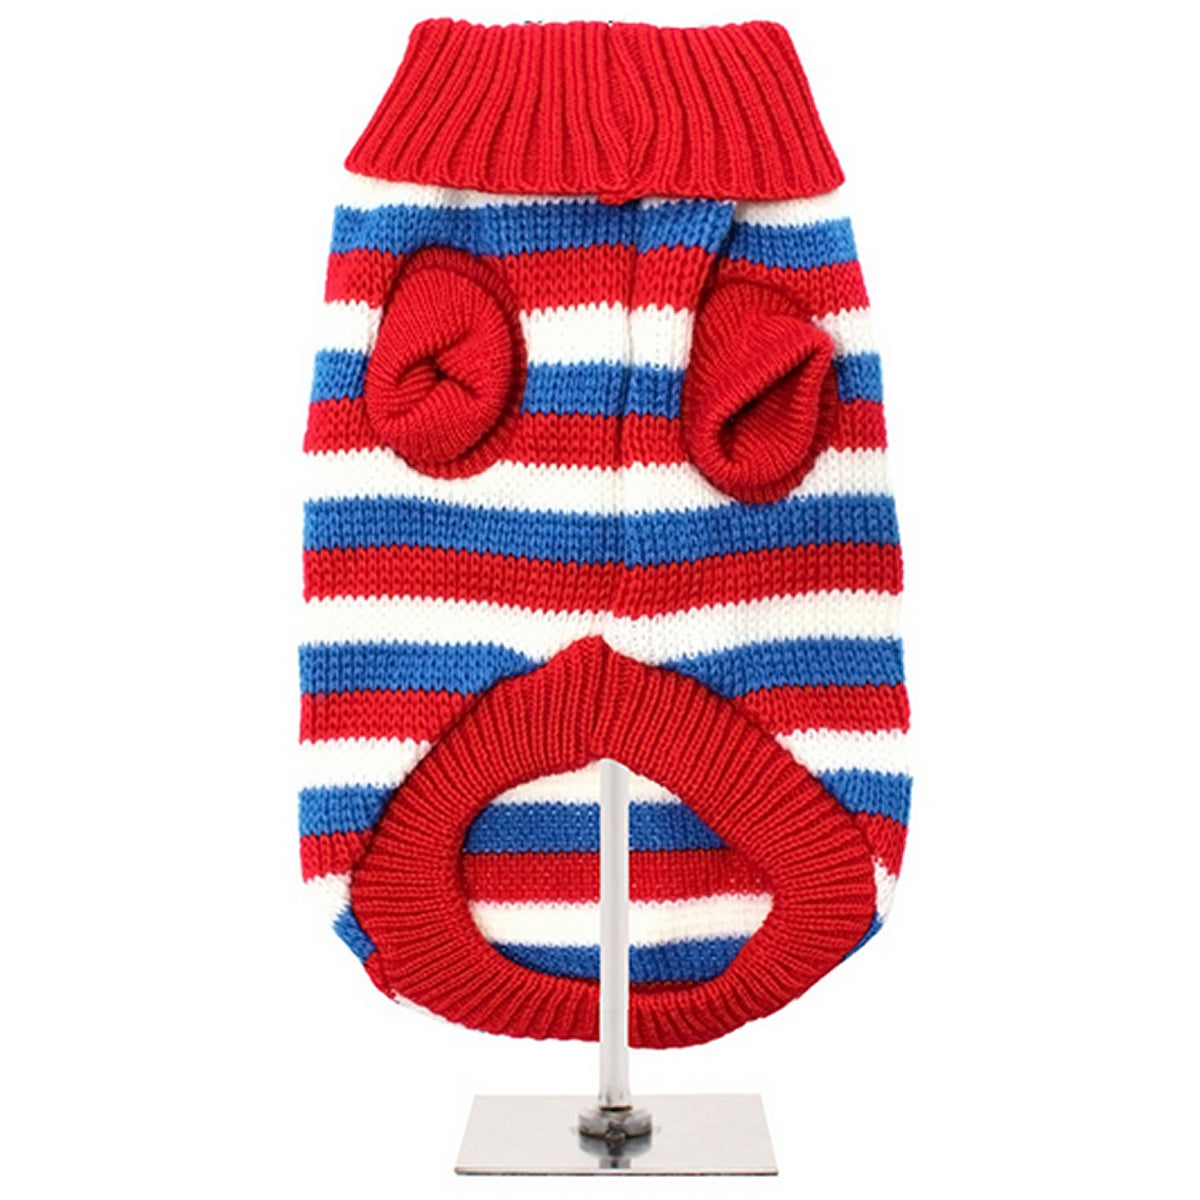 Striped Knitted Dog Jumper Red/White/Blue